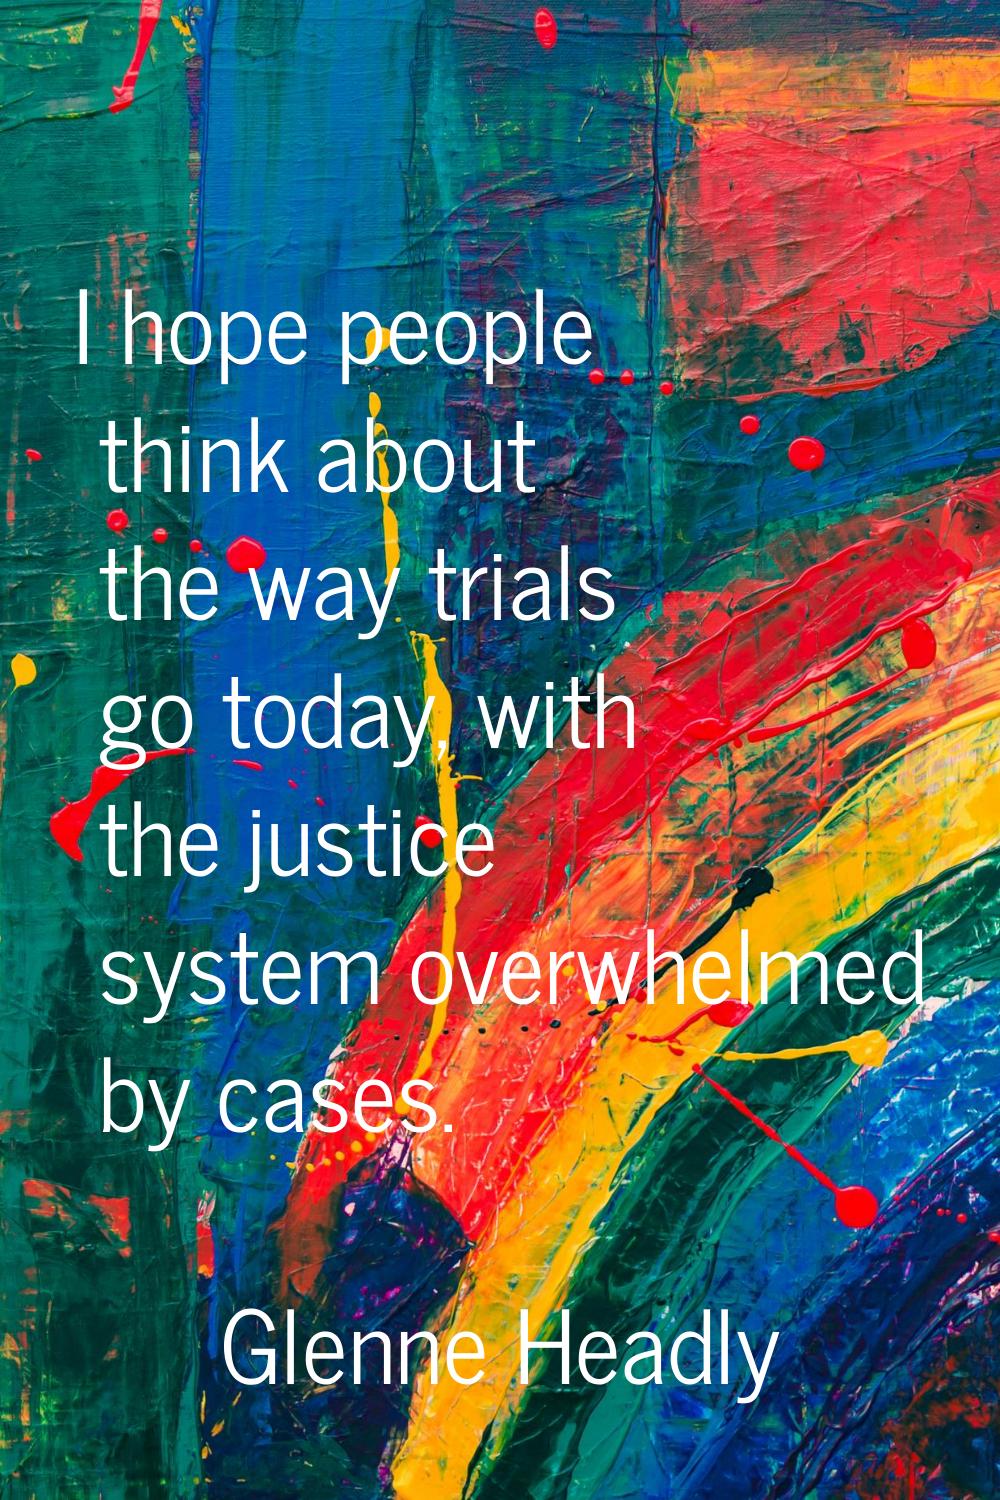 I hope people think about the way trials go today, with the justice system overwhelmed by cases.